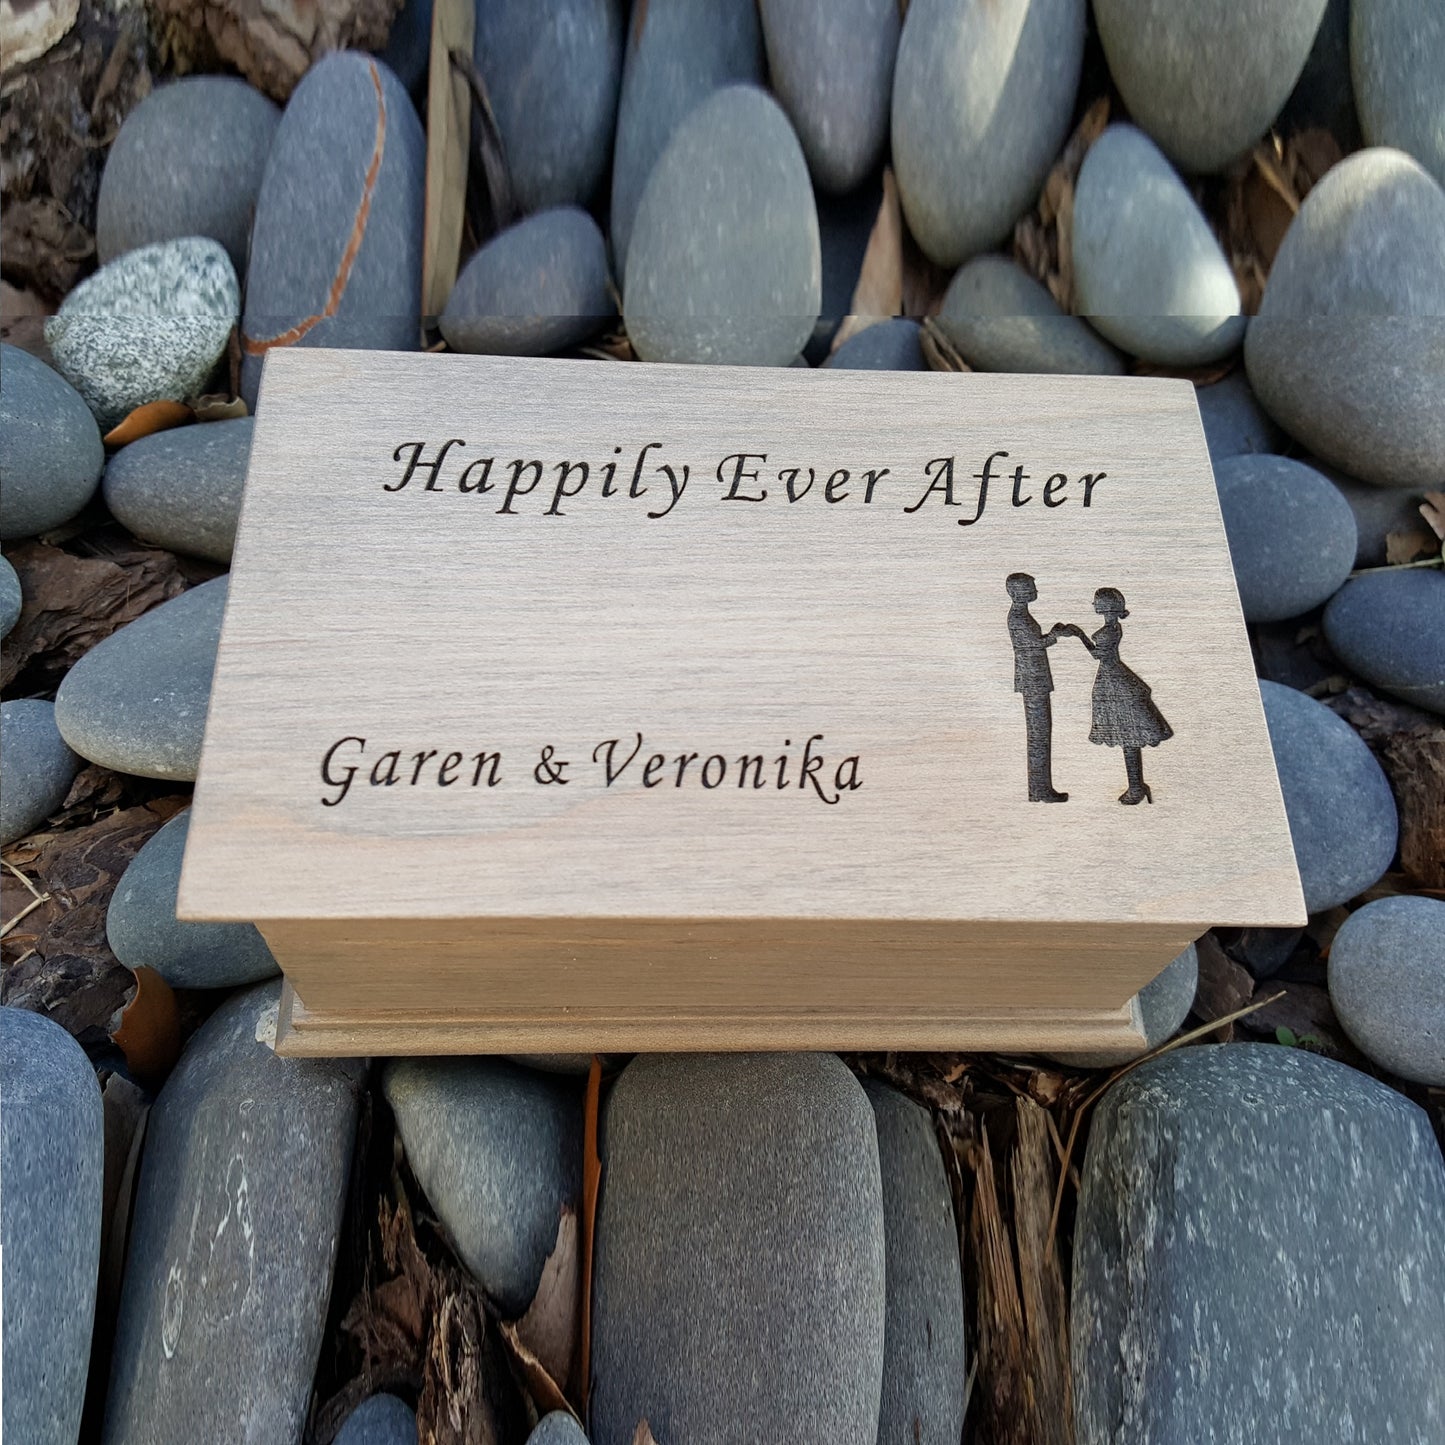 Couple Engraving with Happily Ever After jewelry box with built in music player